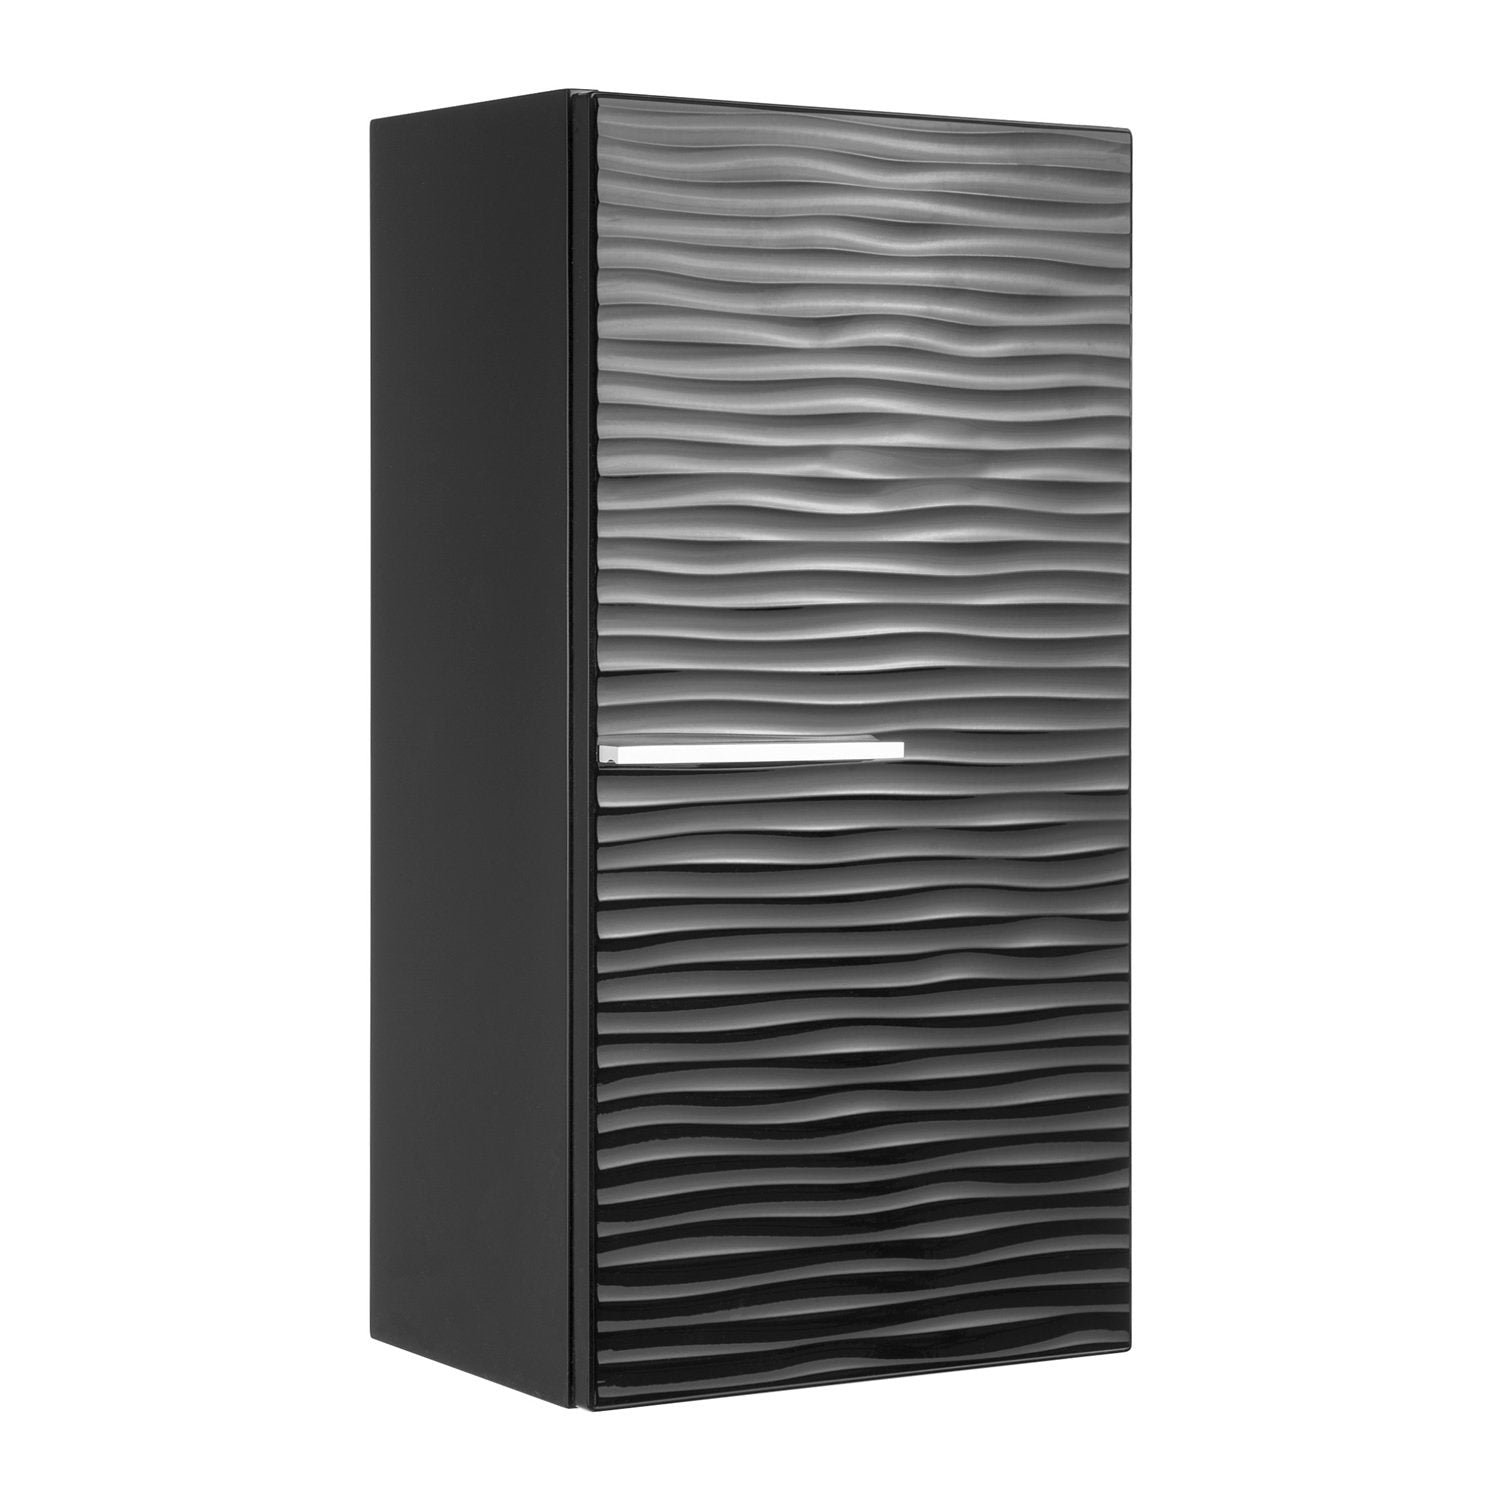 16" Small Side Cabinet, Wall Mount, 1 Door whit Handle and Soft Close and Right Opening, Black, Serie Dune by VALENZUELA